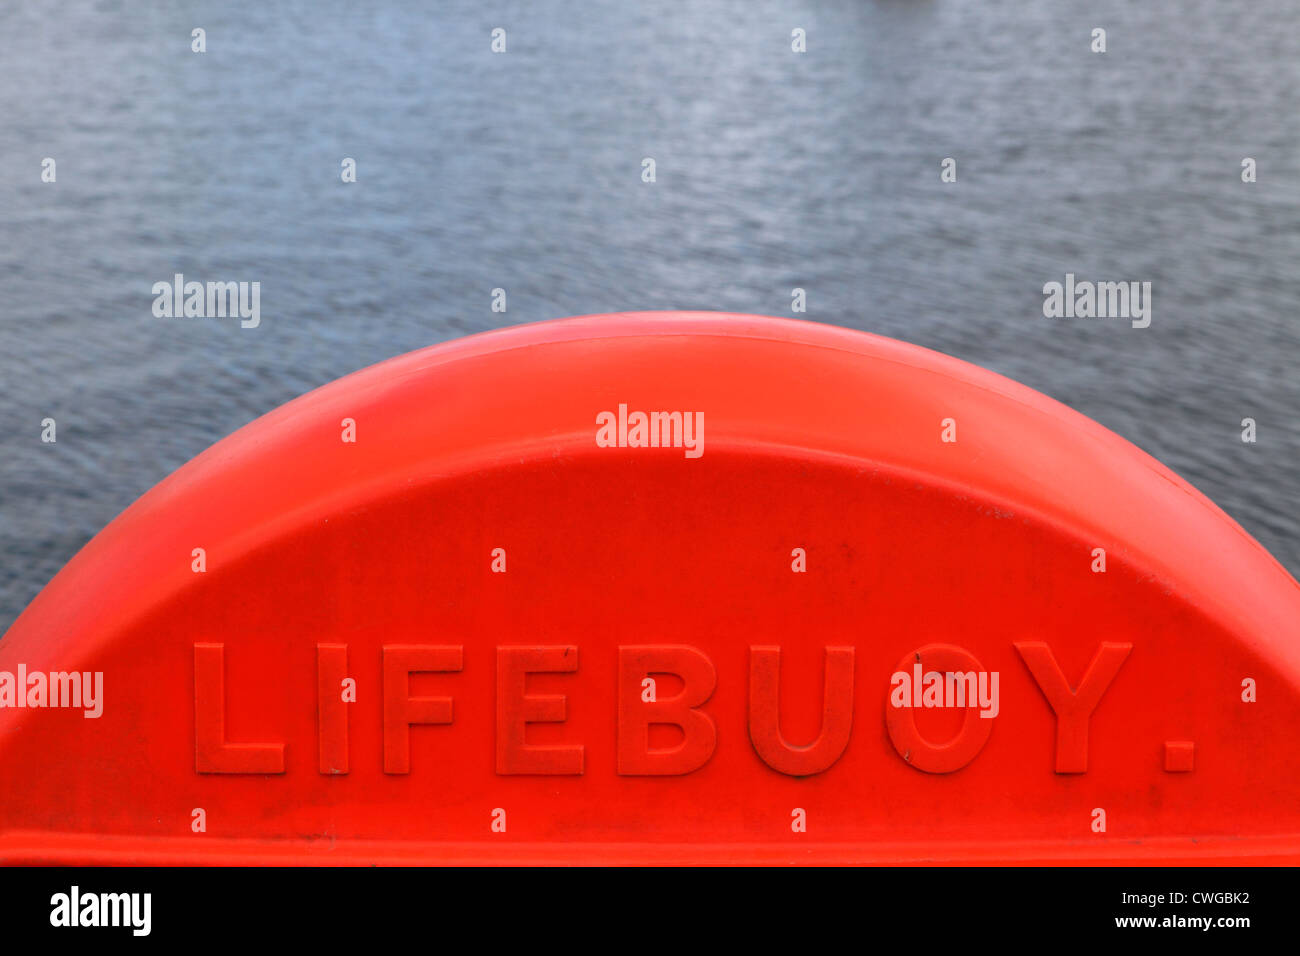 Bright orange red plastic Lifebuoy container on waterfront with calm sea behind. Bright colorful, safety equipment, Cornwall, UK Stock Photo